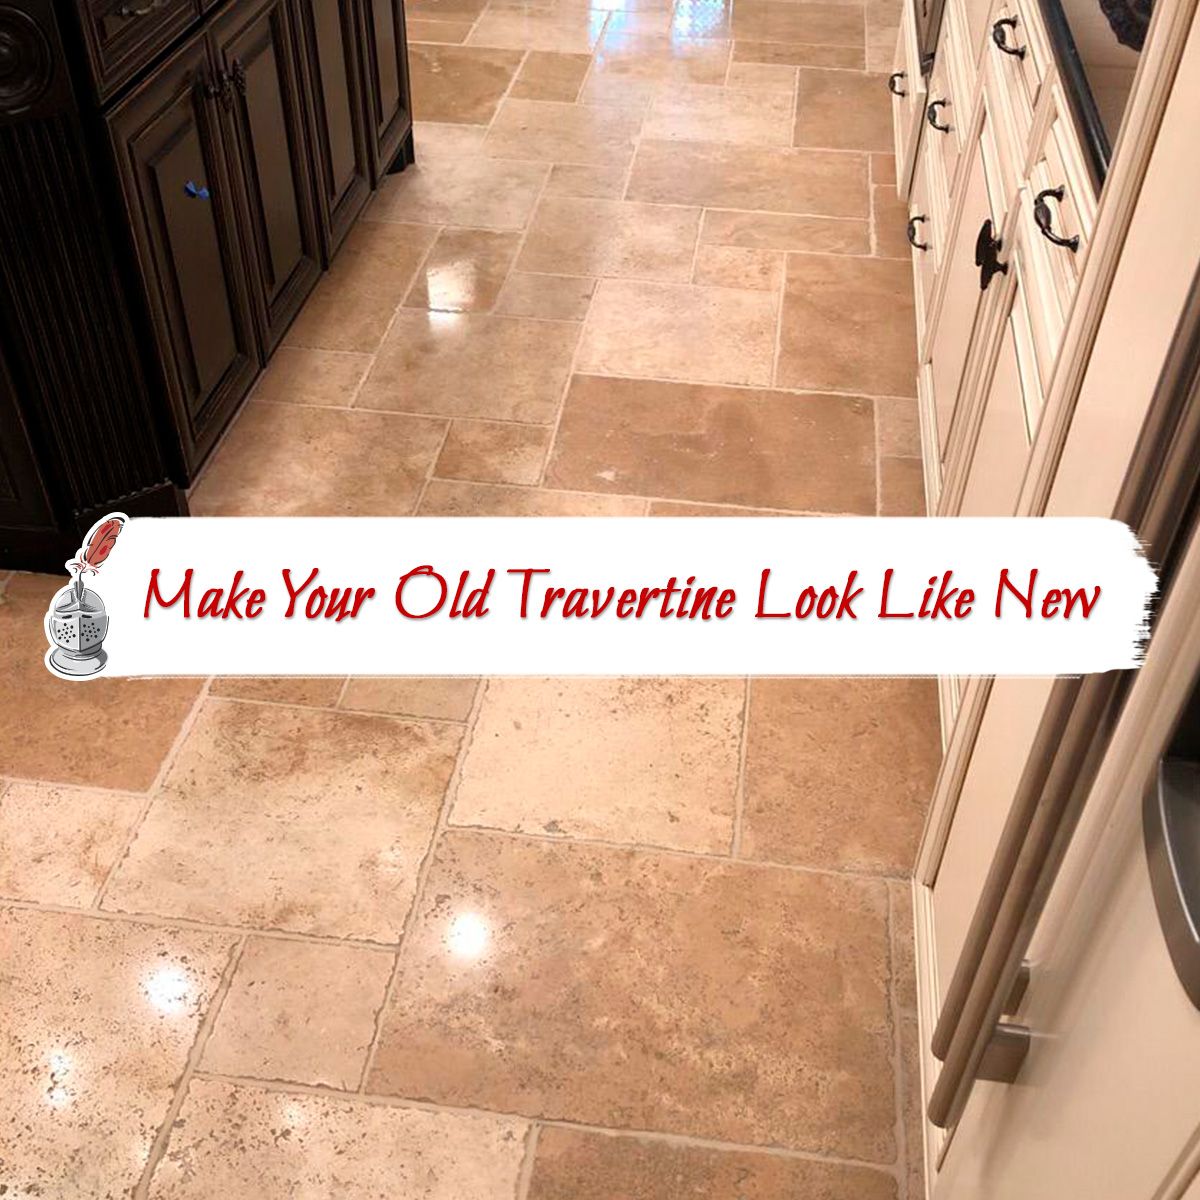 Make Your Old Travertine Look Like New